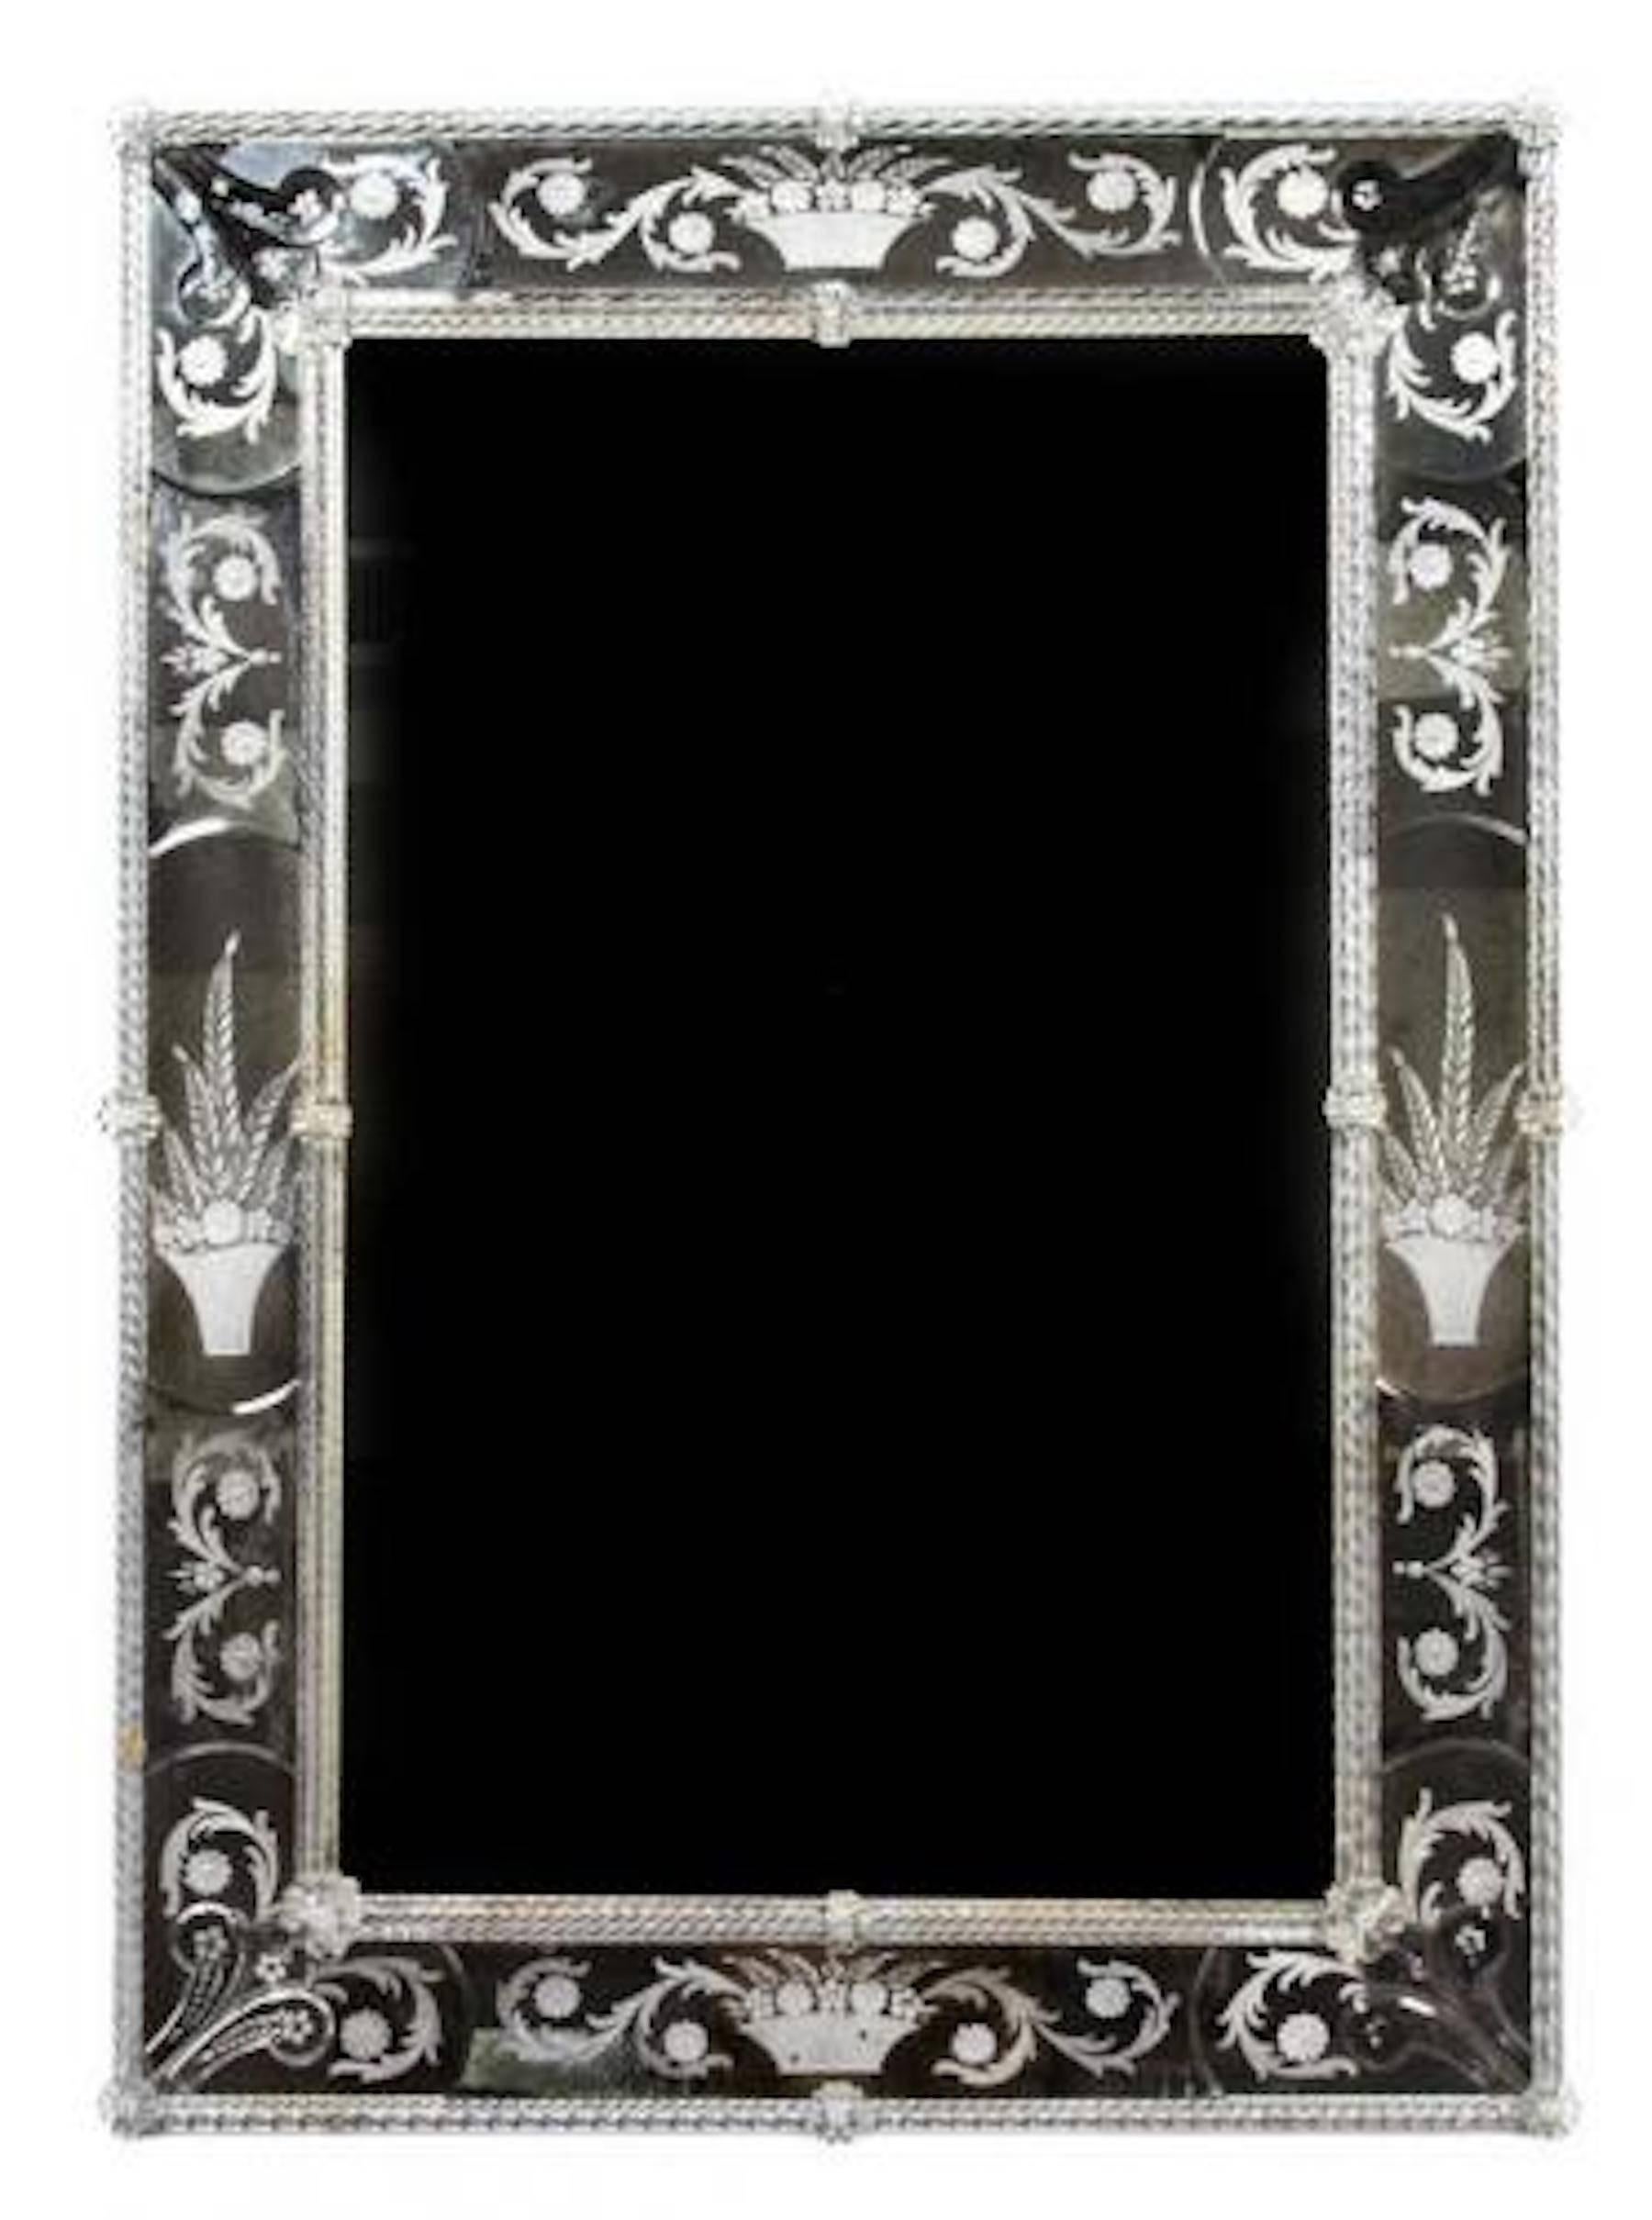 Venetian engraved mirror, of rectangular form, with fine engravings of baskets of flowers and plants.